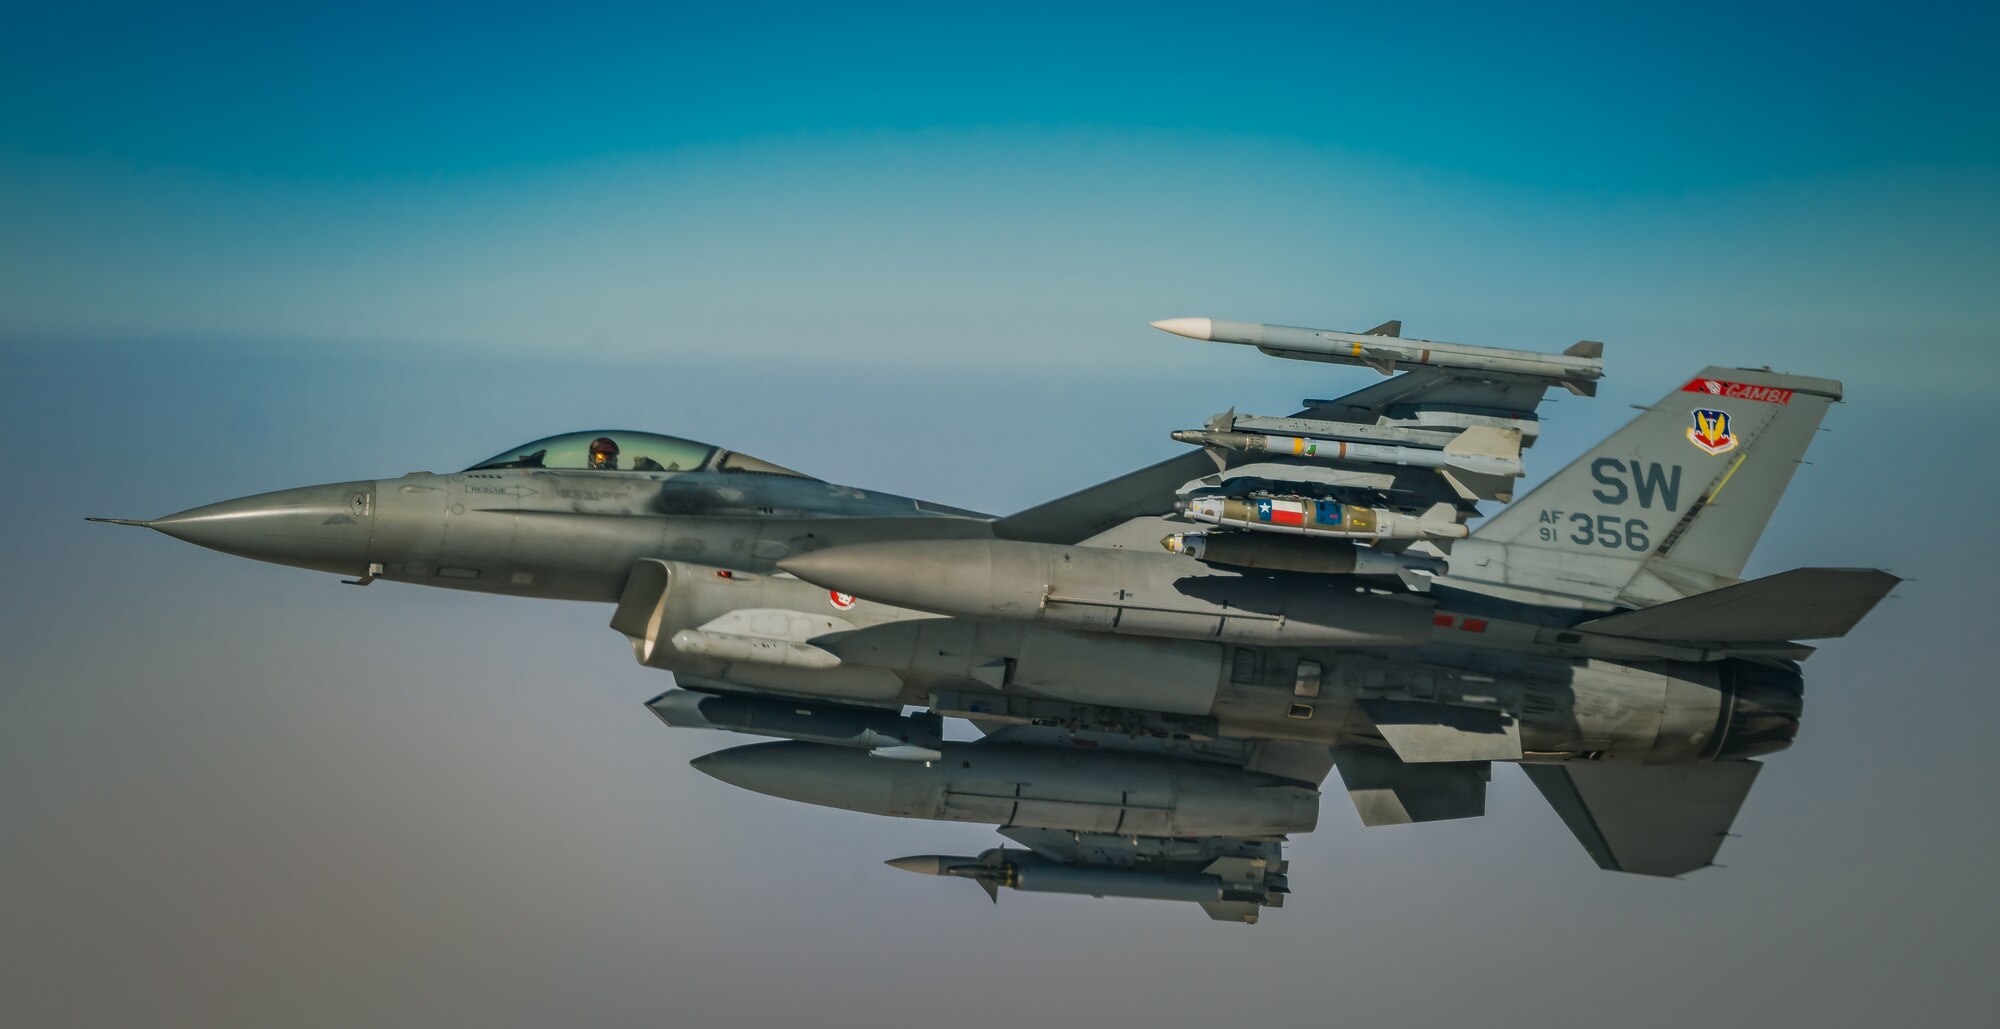 340th EARS provides fuel to F-16s